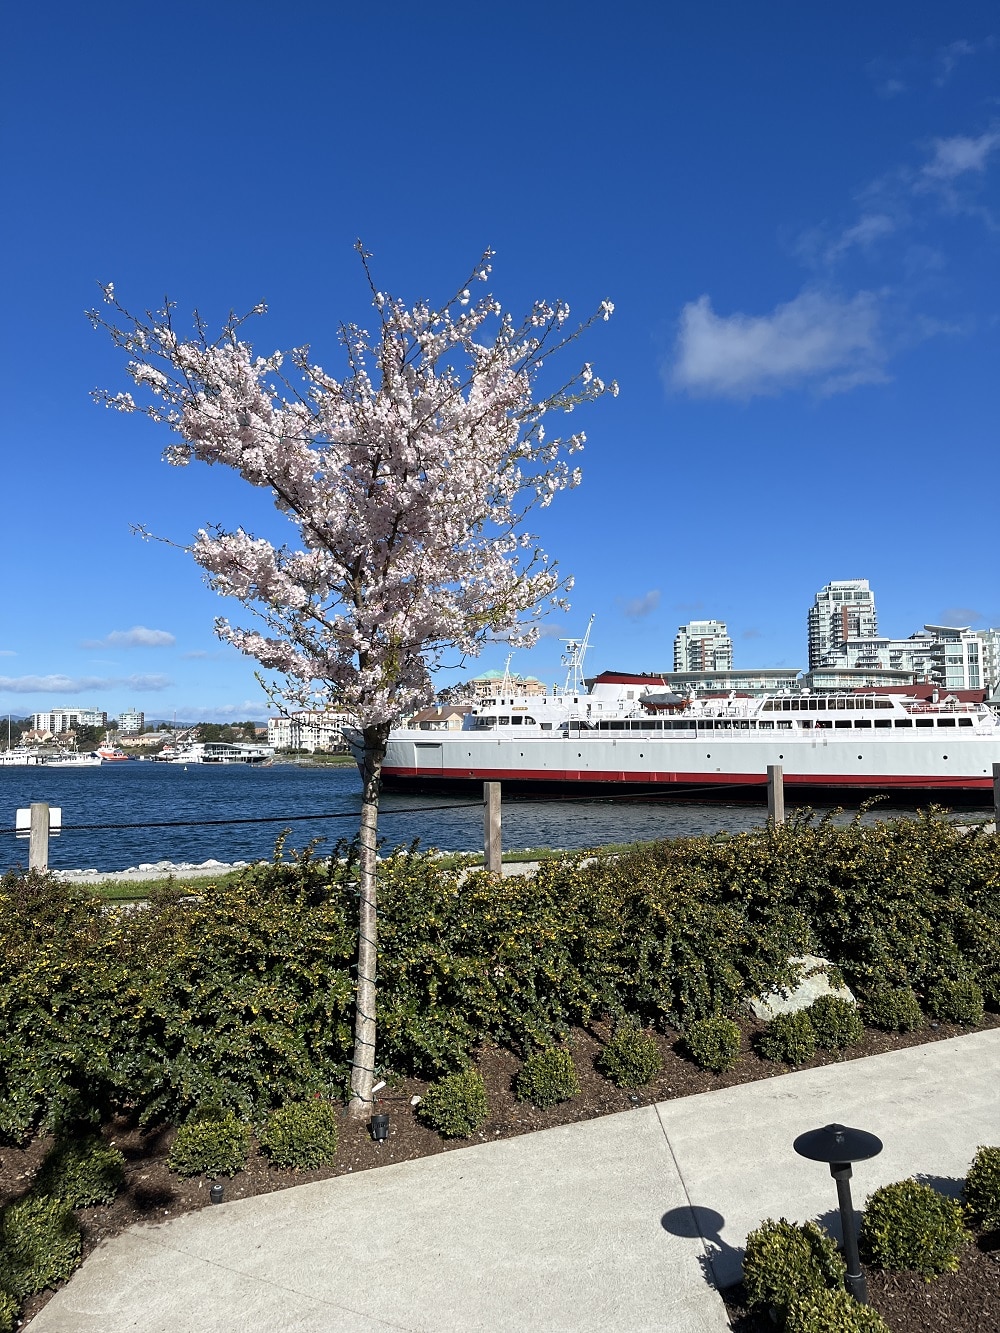 Cherry blossom tree in the kitchen gardens of Inn at Laurel Point, as the Coho passes by in the background